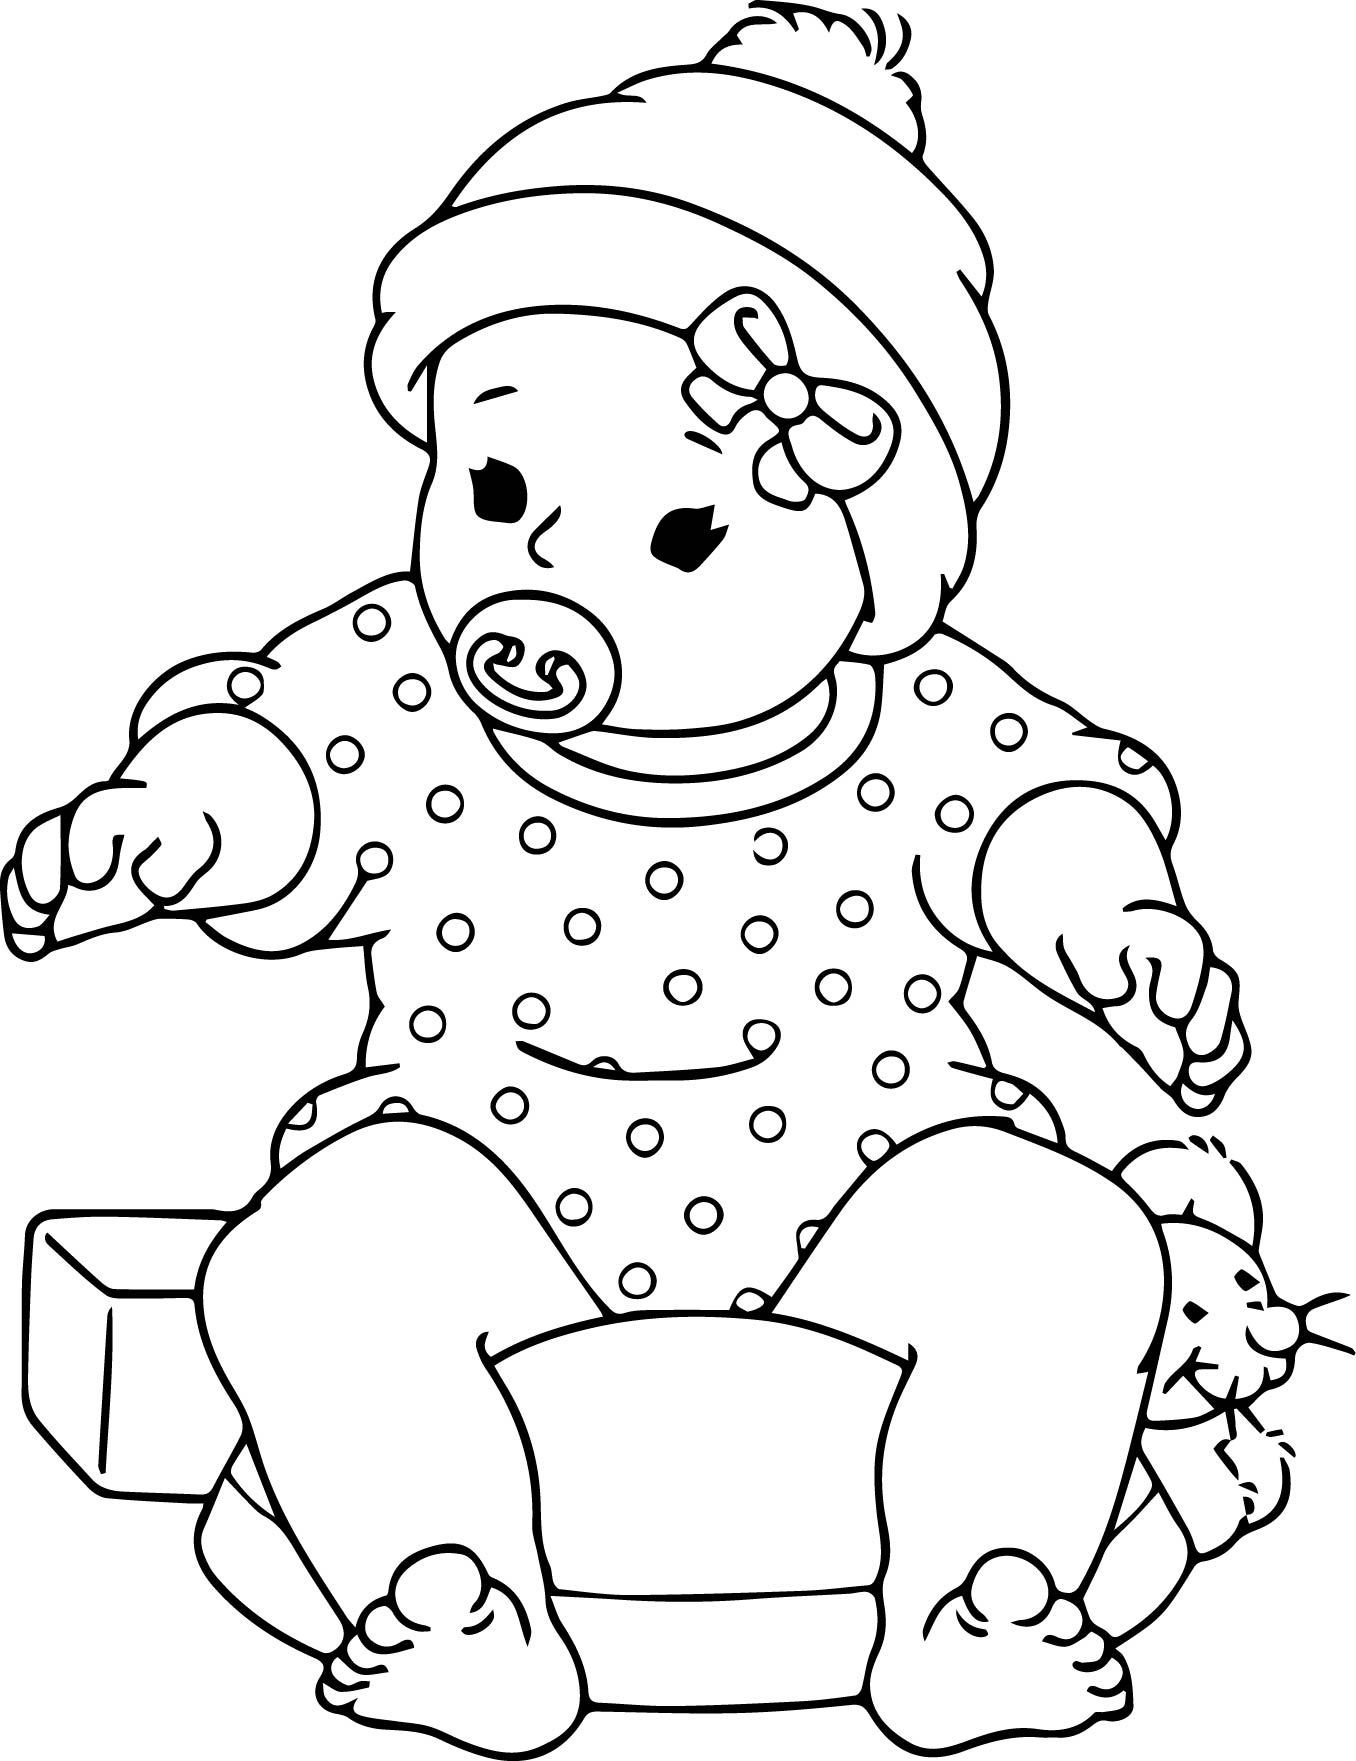 Baby Doll Coloring Pages
 Free Printable Baby Doll Coloring Pages Throughout Inside